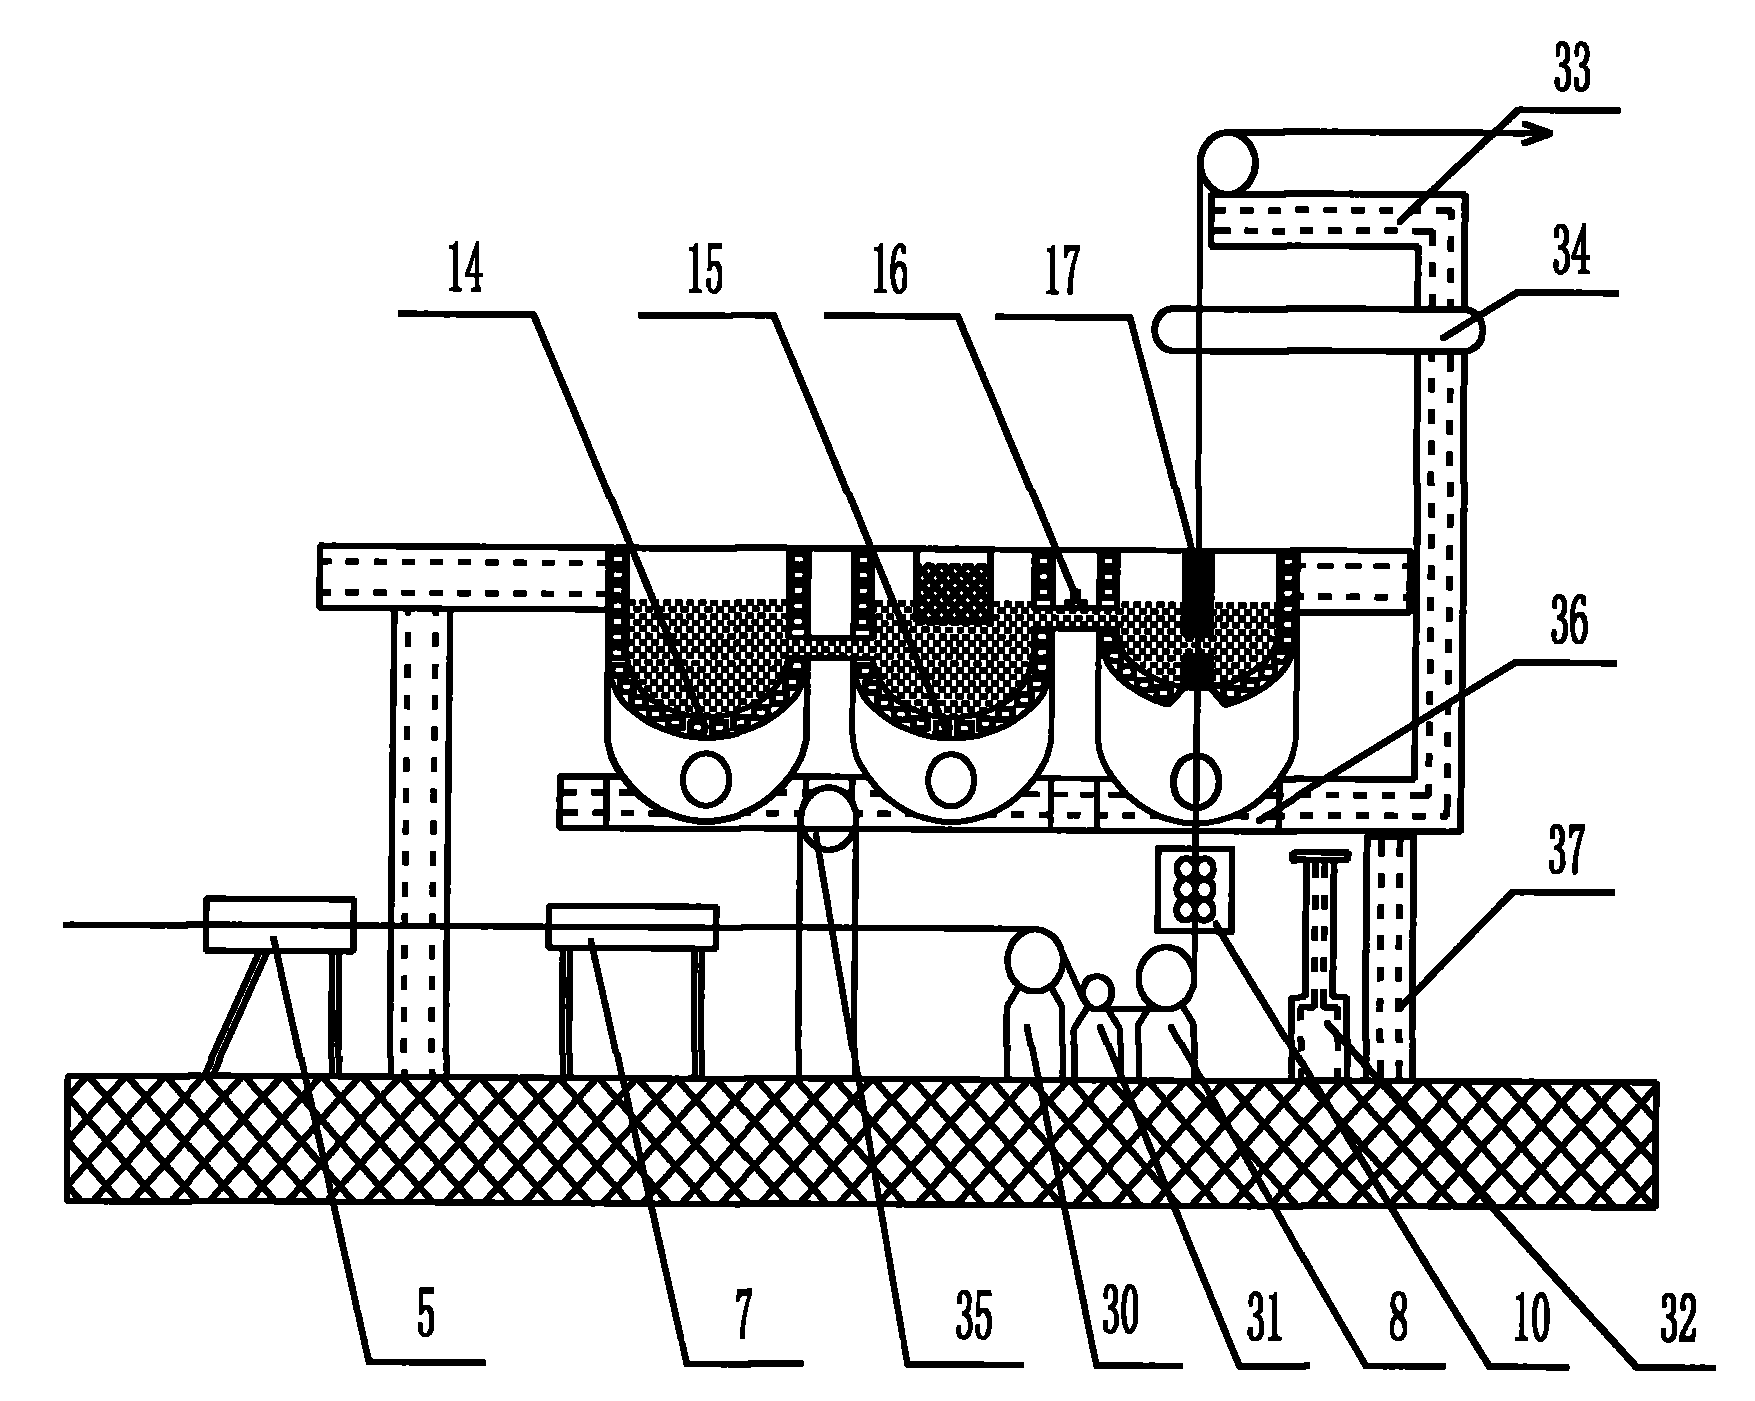 Method and device for continuous up-casting of copper-clad steel